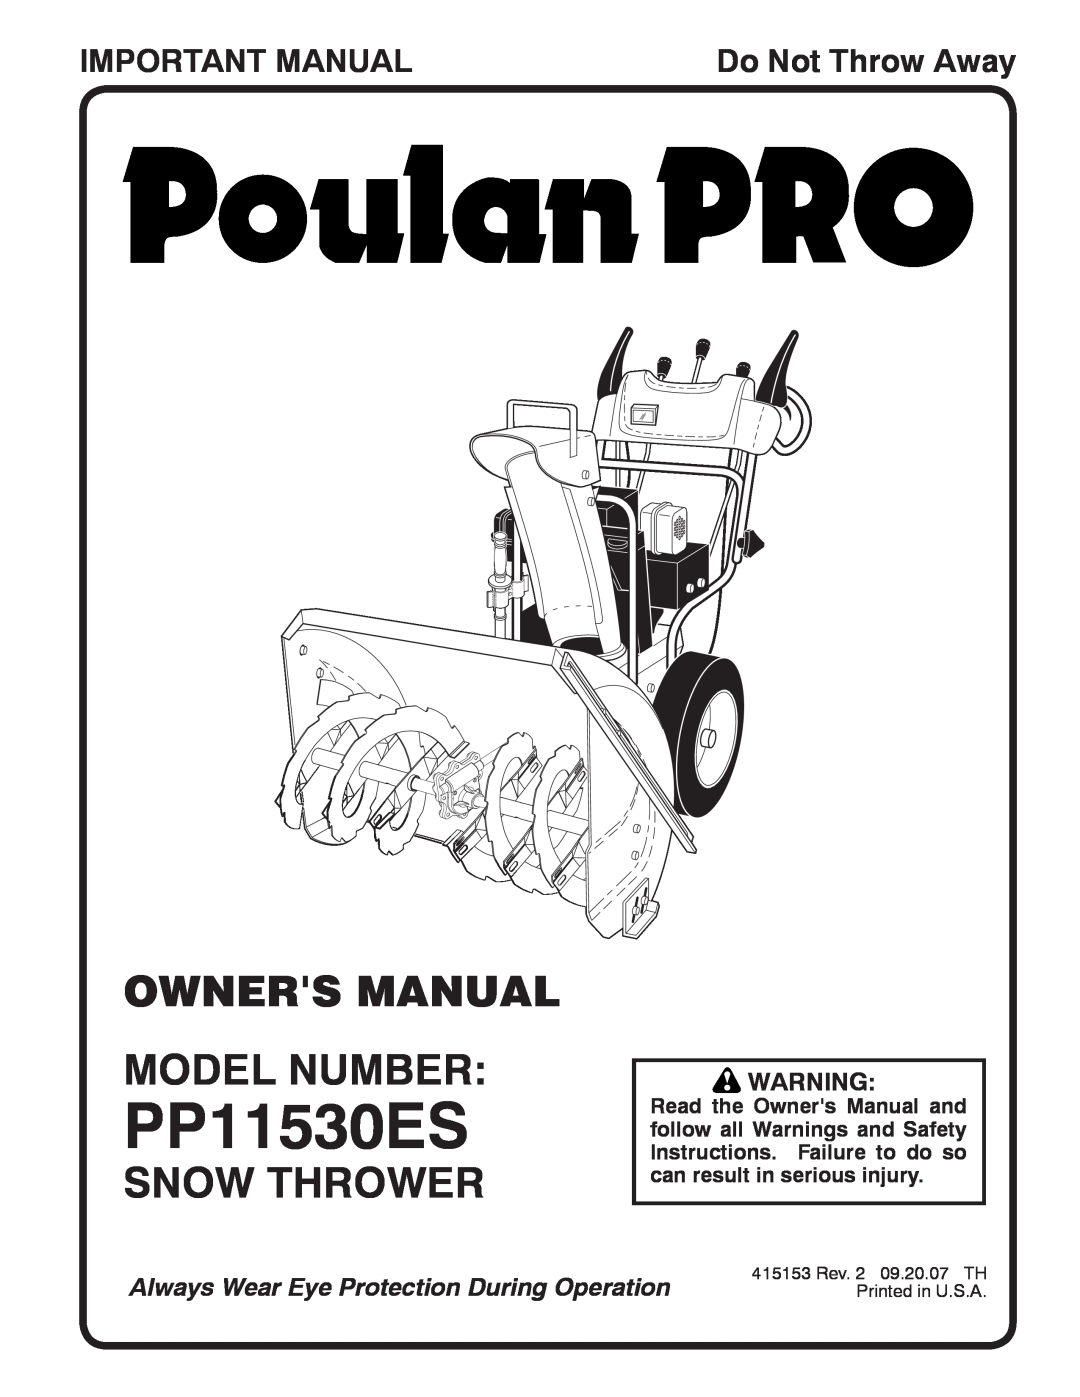 Poulan 415153, 96192001901 owner manual Snow Thrower, Important Manual, PP11530ES, Do Not Throw Away 